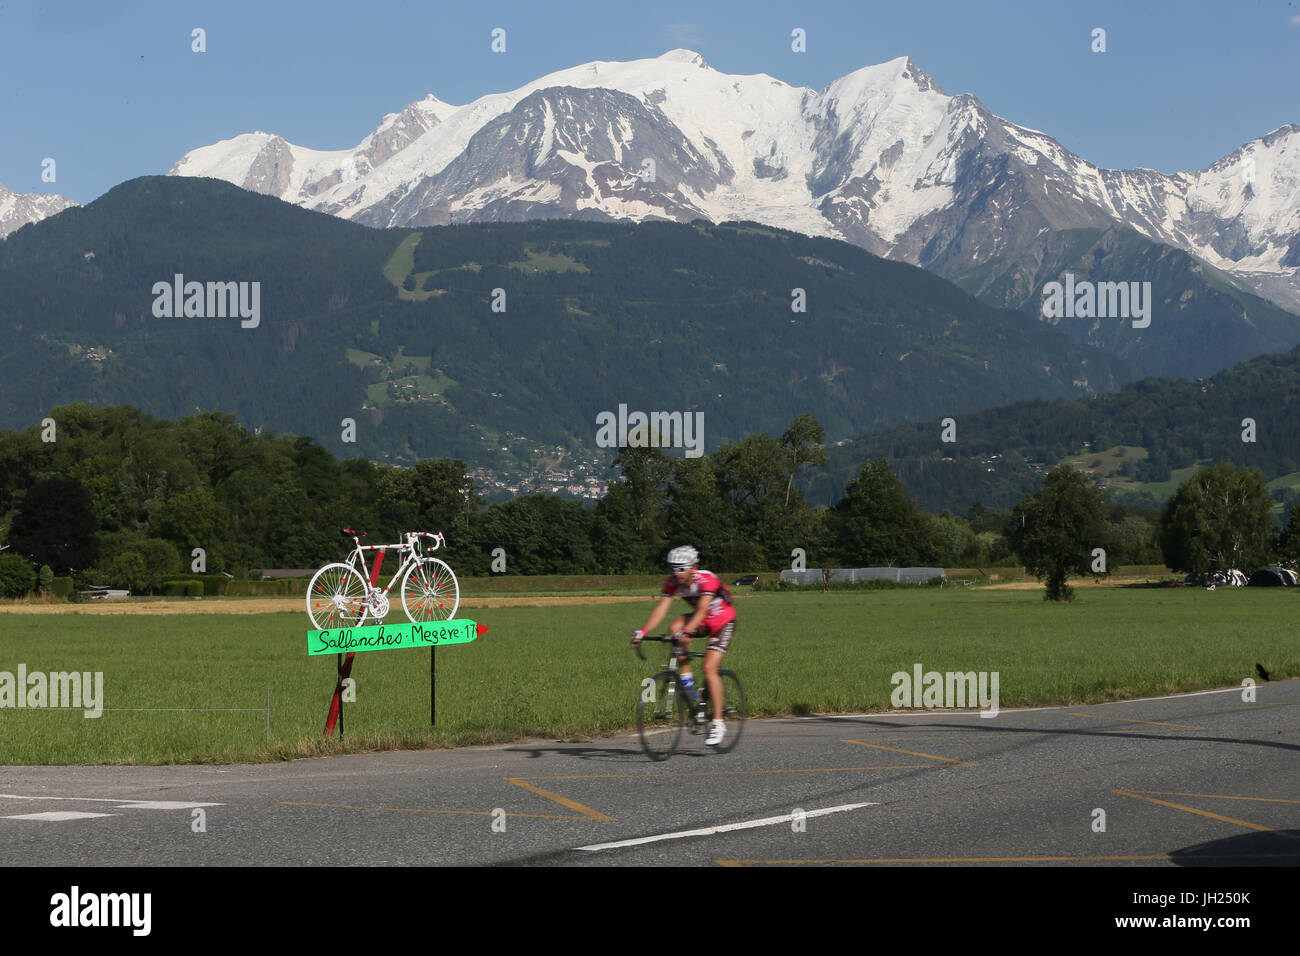 French Alps. Mont Blanc Massif. Man riding bicycle on a road;  France. Stock Photo